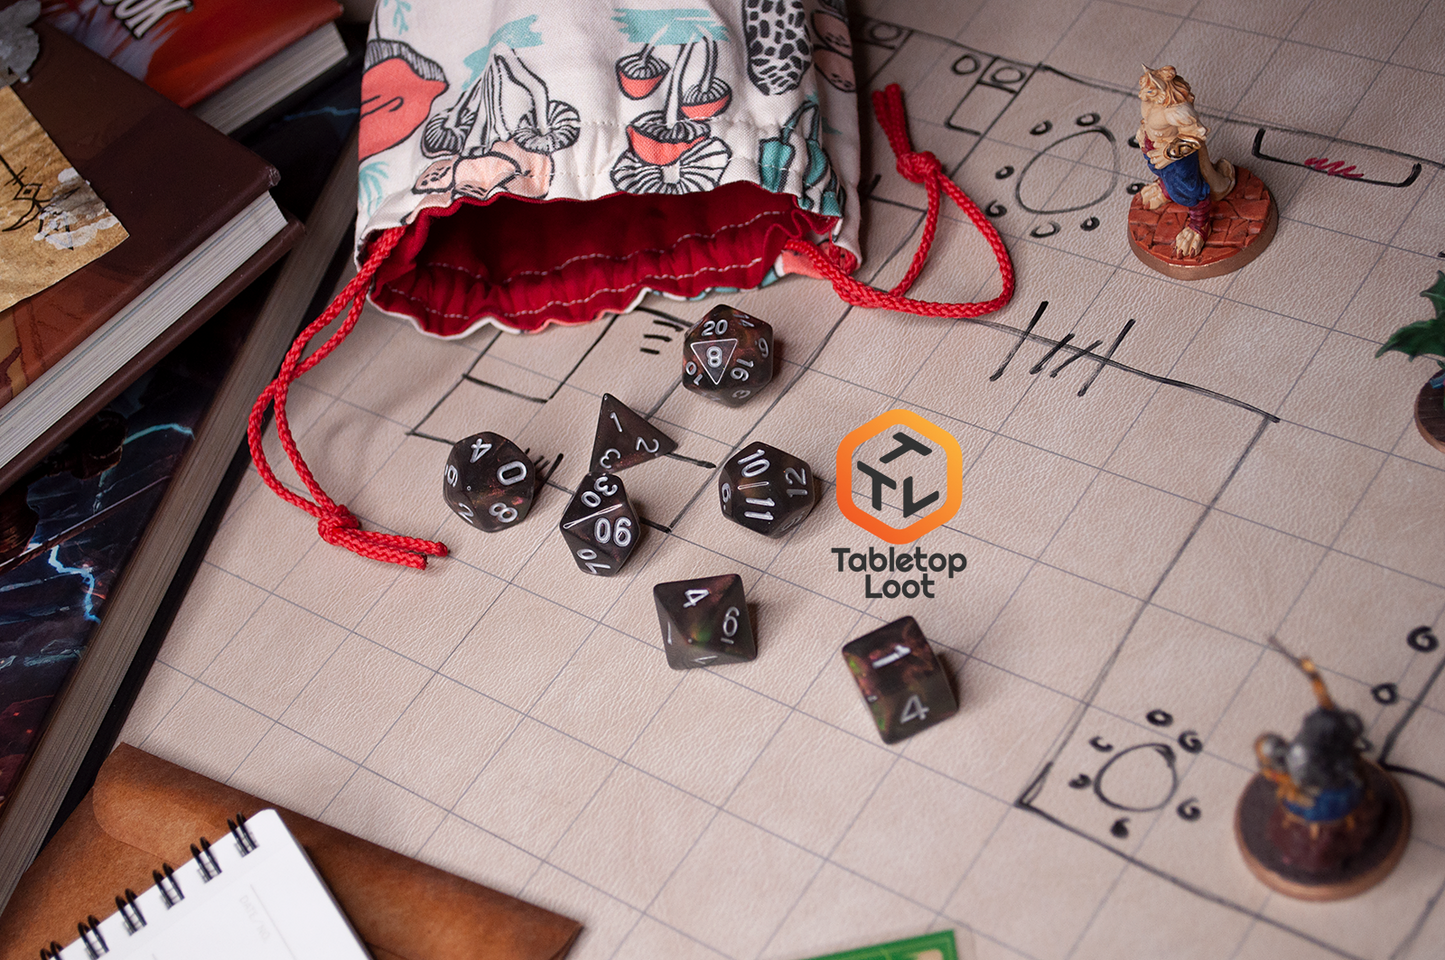 The Dark Star 7 piece dice set from Tabletop Loot with glittering swirls of pink, green, gold, and blue, inked in silver, spills across a gaming table.